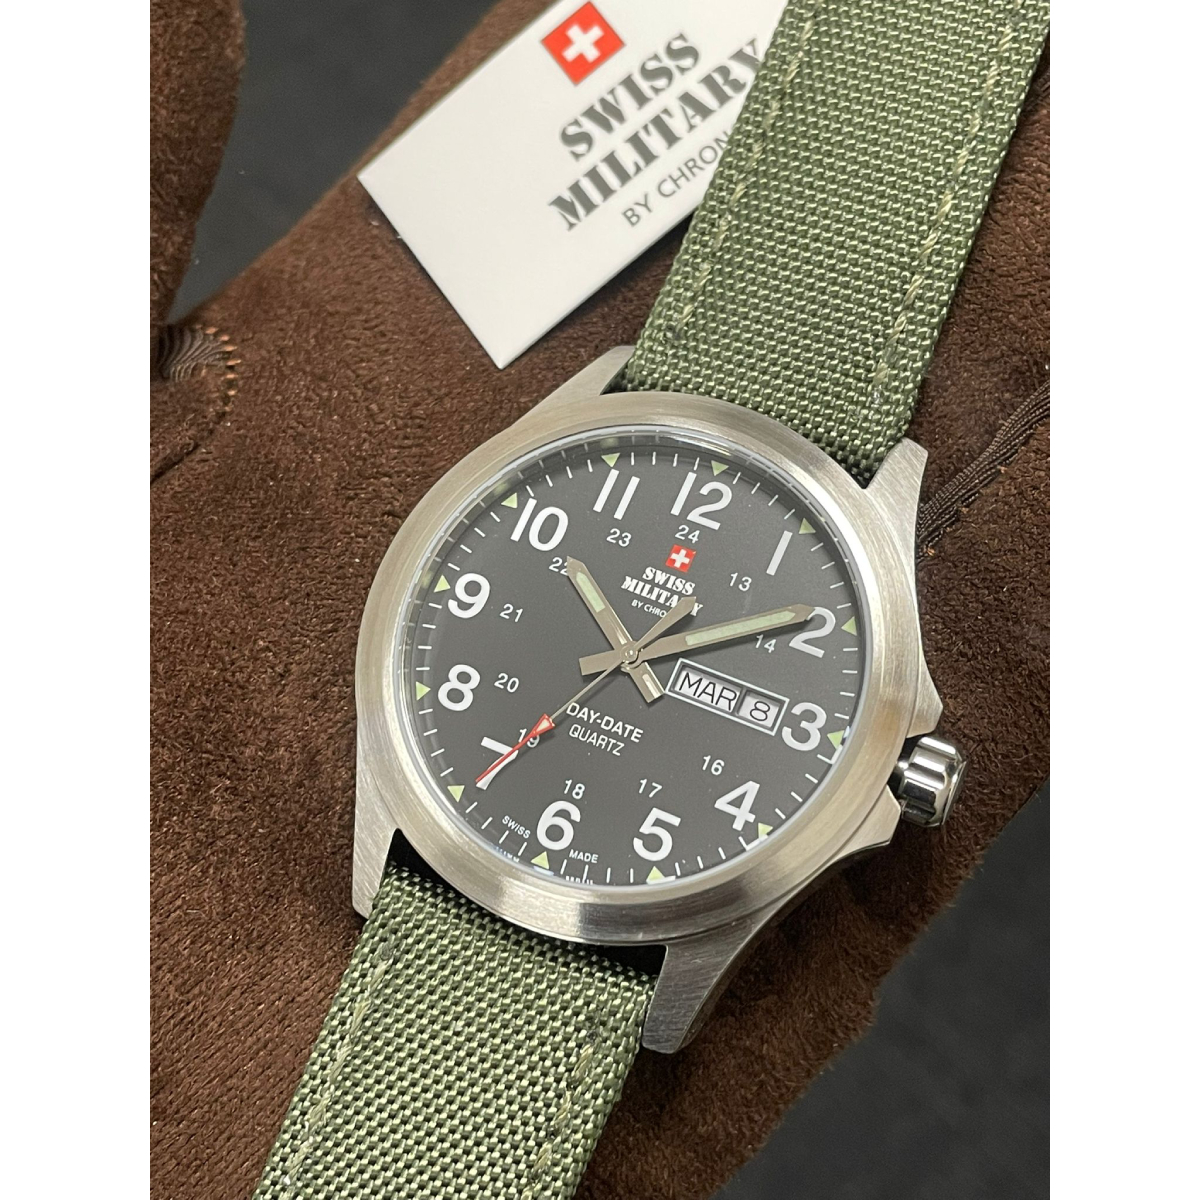 SWISS-MILITARY GENT’S WATCH SMP36040-05.002